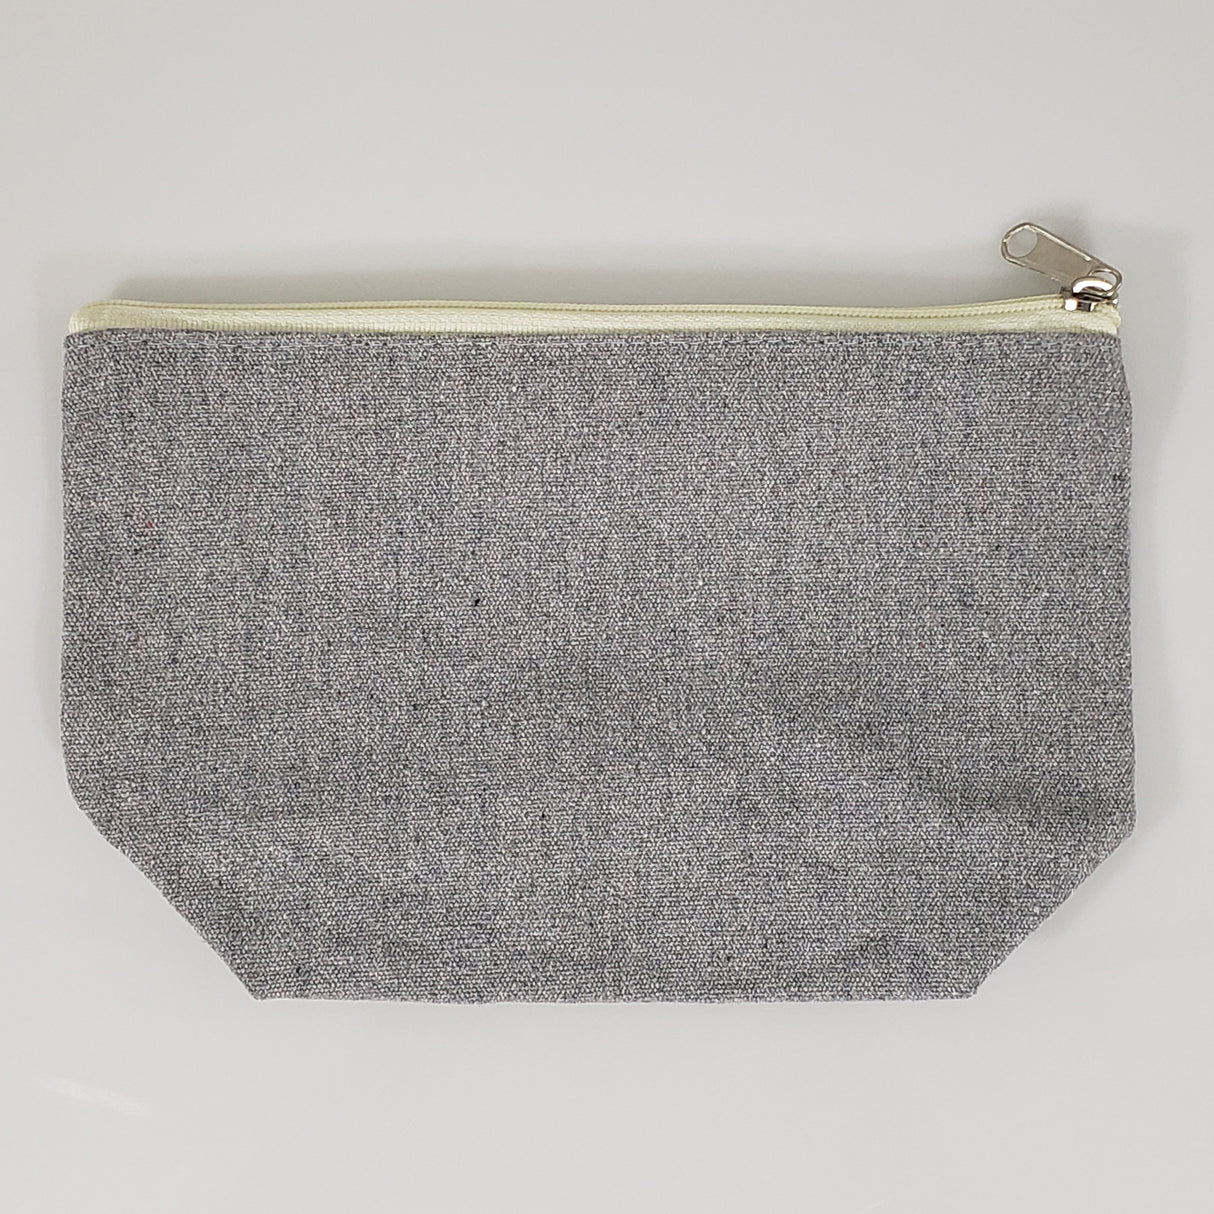 6 ct Large Size Recycled Flat Zipper Cosmetic Bag - Pack of 6